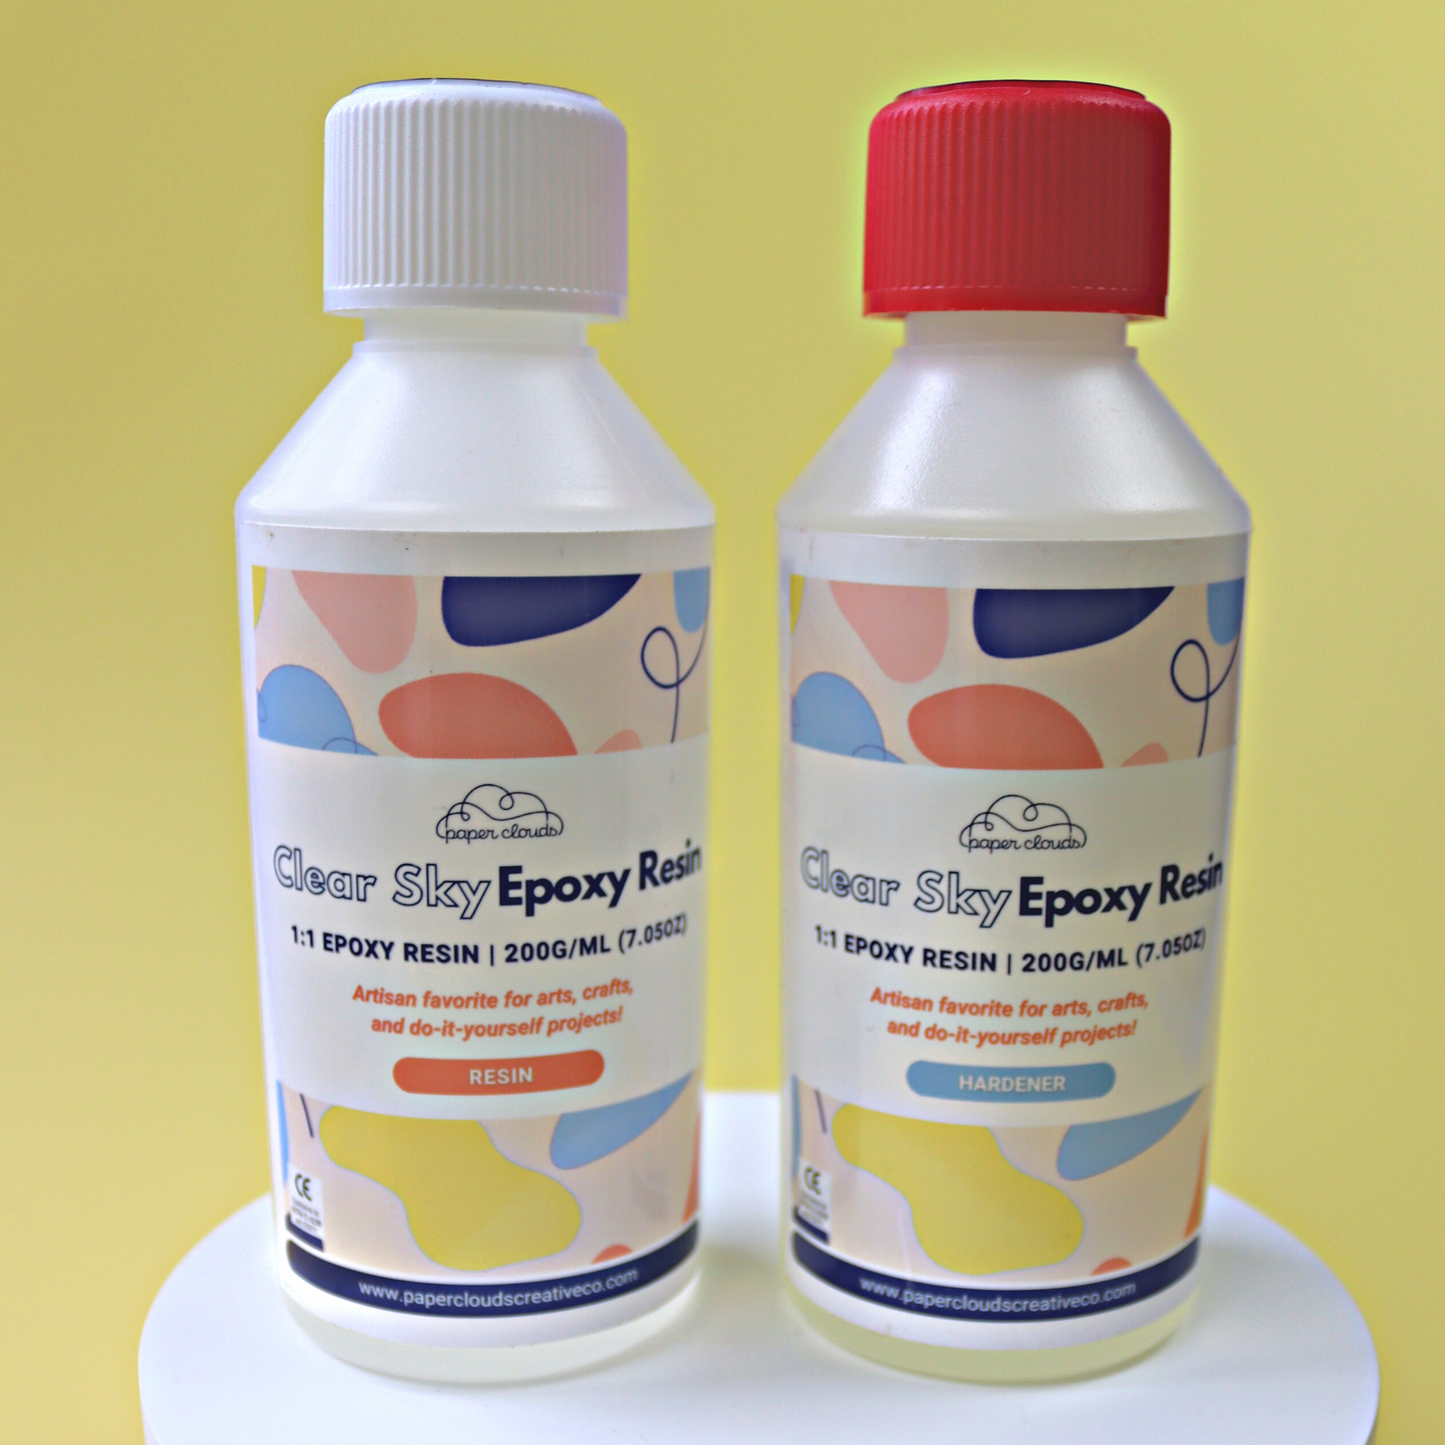 Paper Clouds' Clear Sky Epoxy Resin (400G)